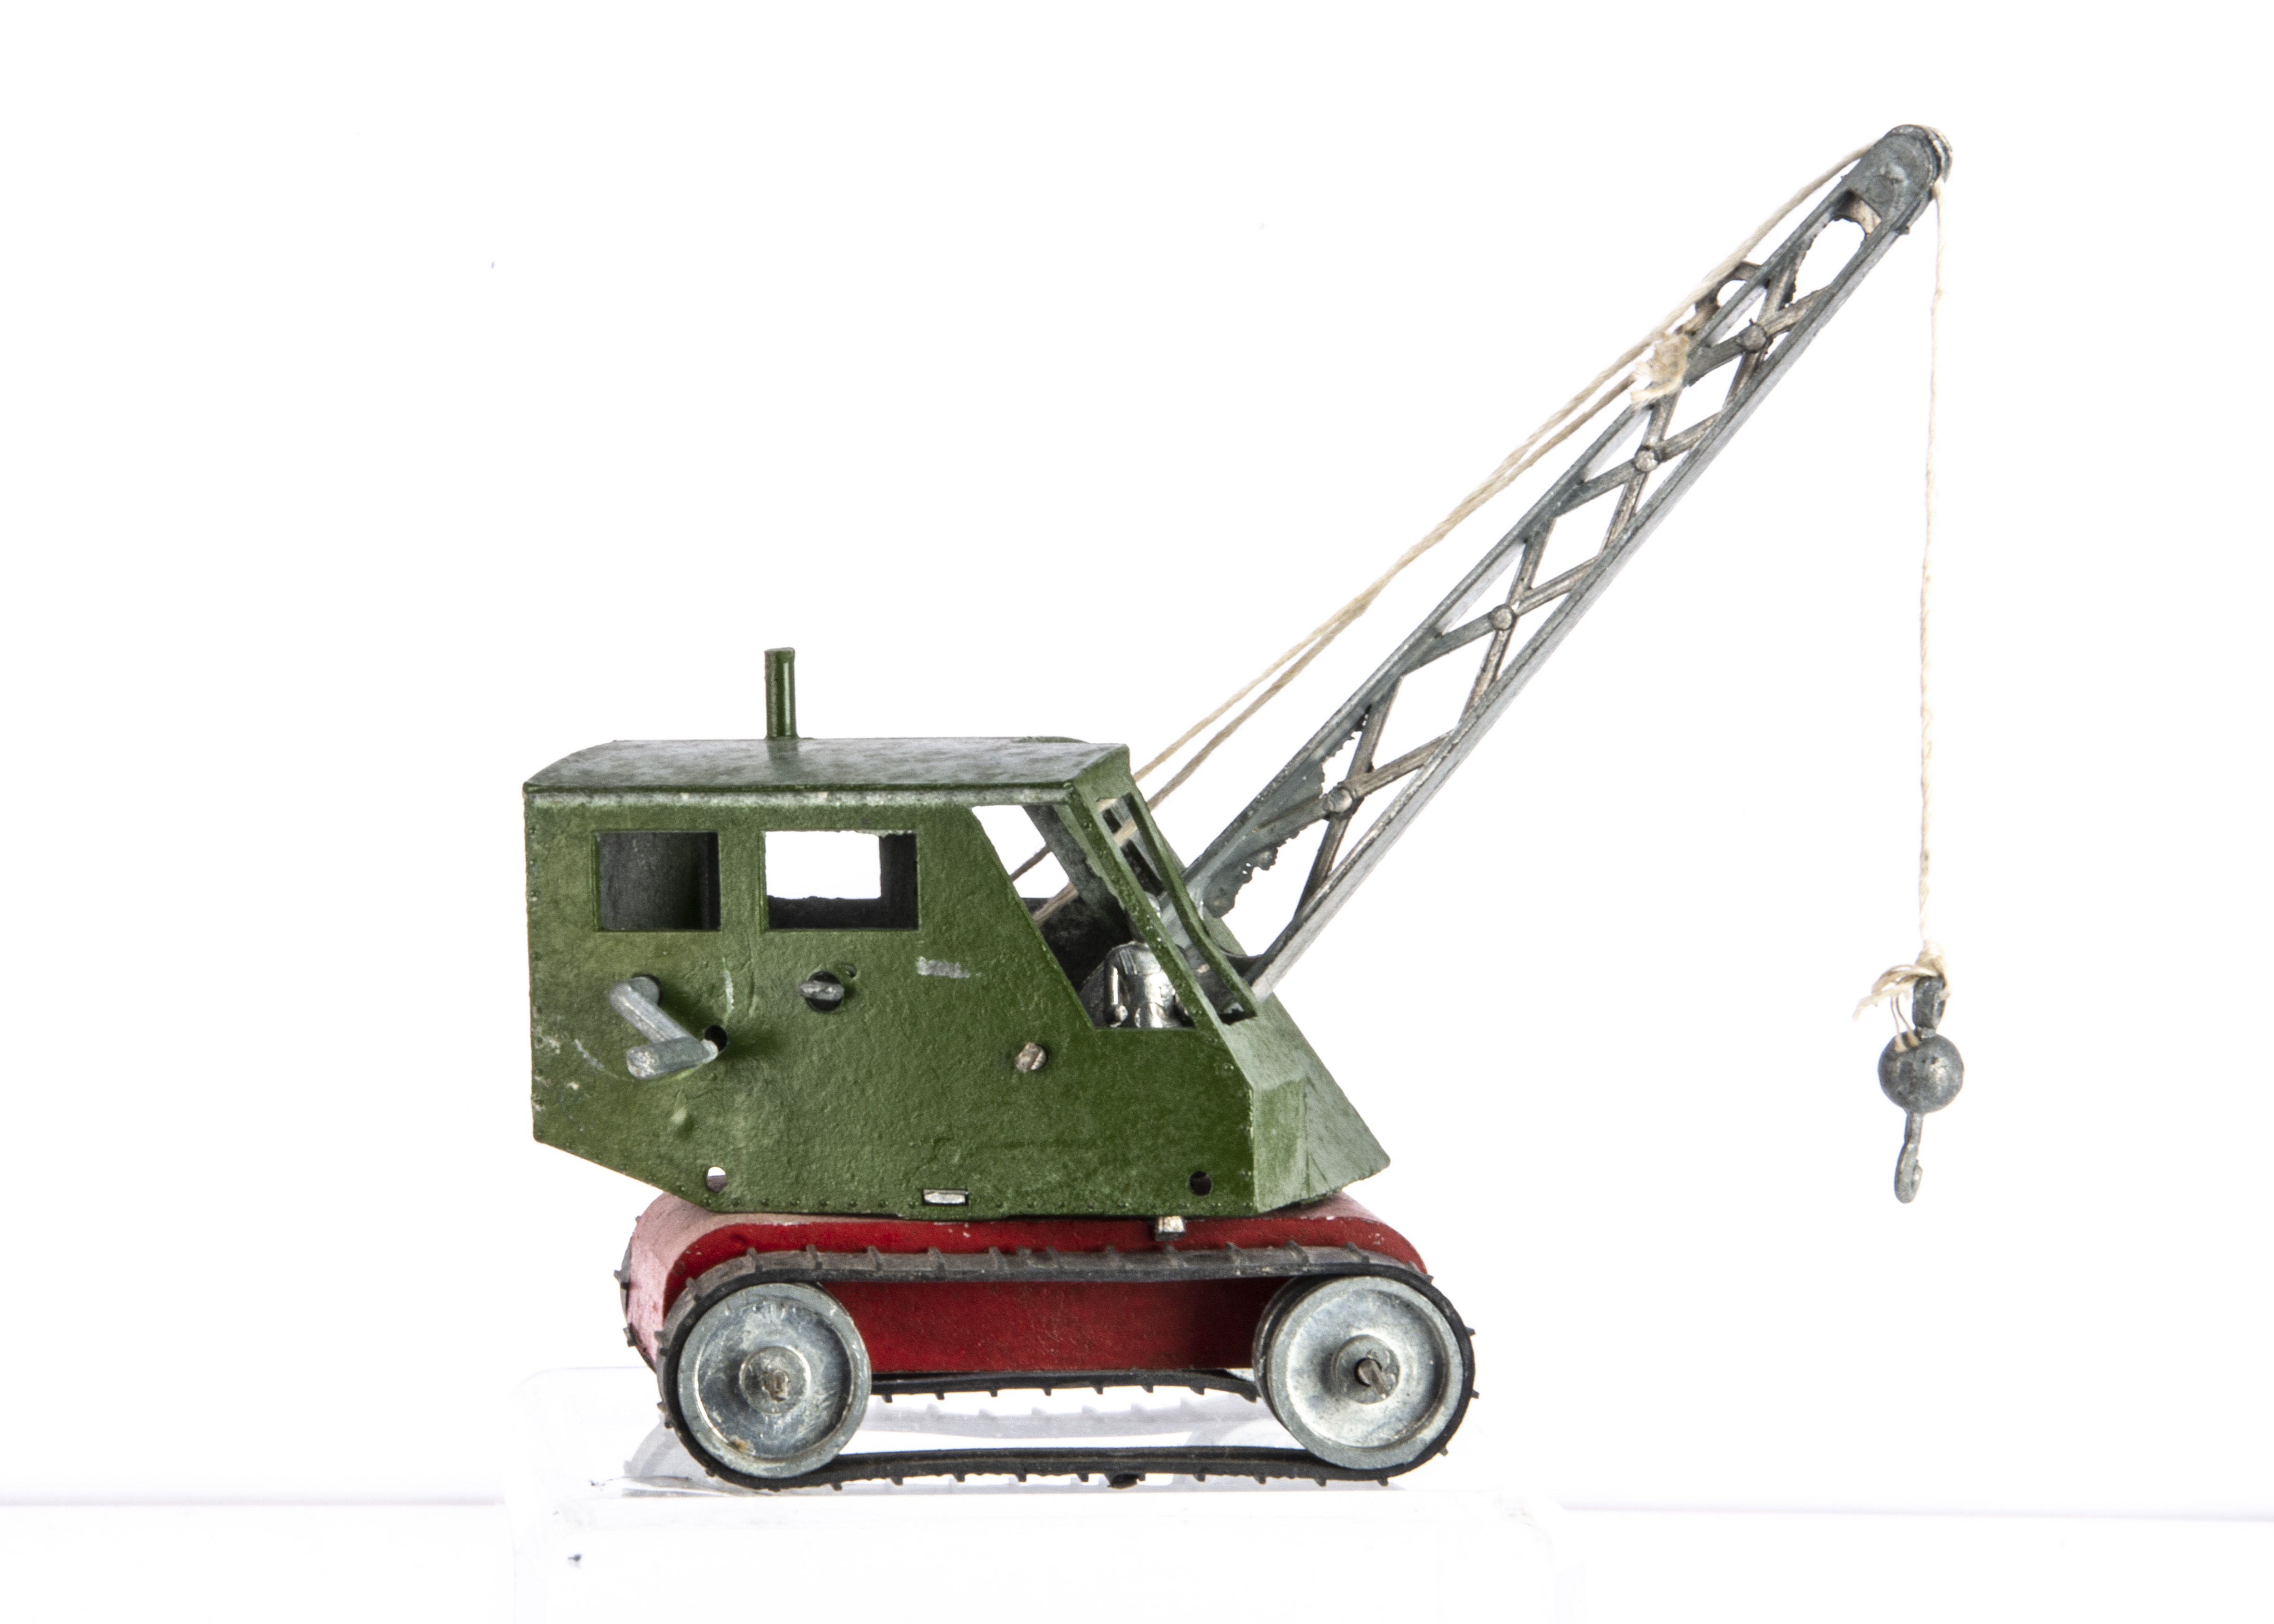 A Teeny Toy (Cleveland Toy Manufacturing) Mobile Crane, dark green cab, red base, bare metal jib, - Image 2 of 3